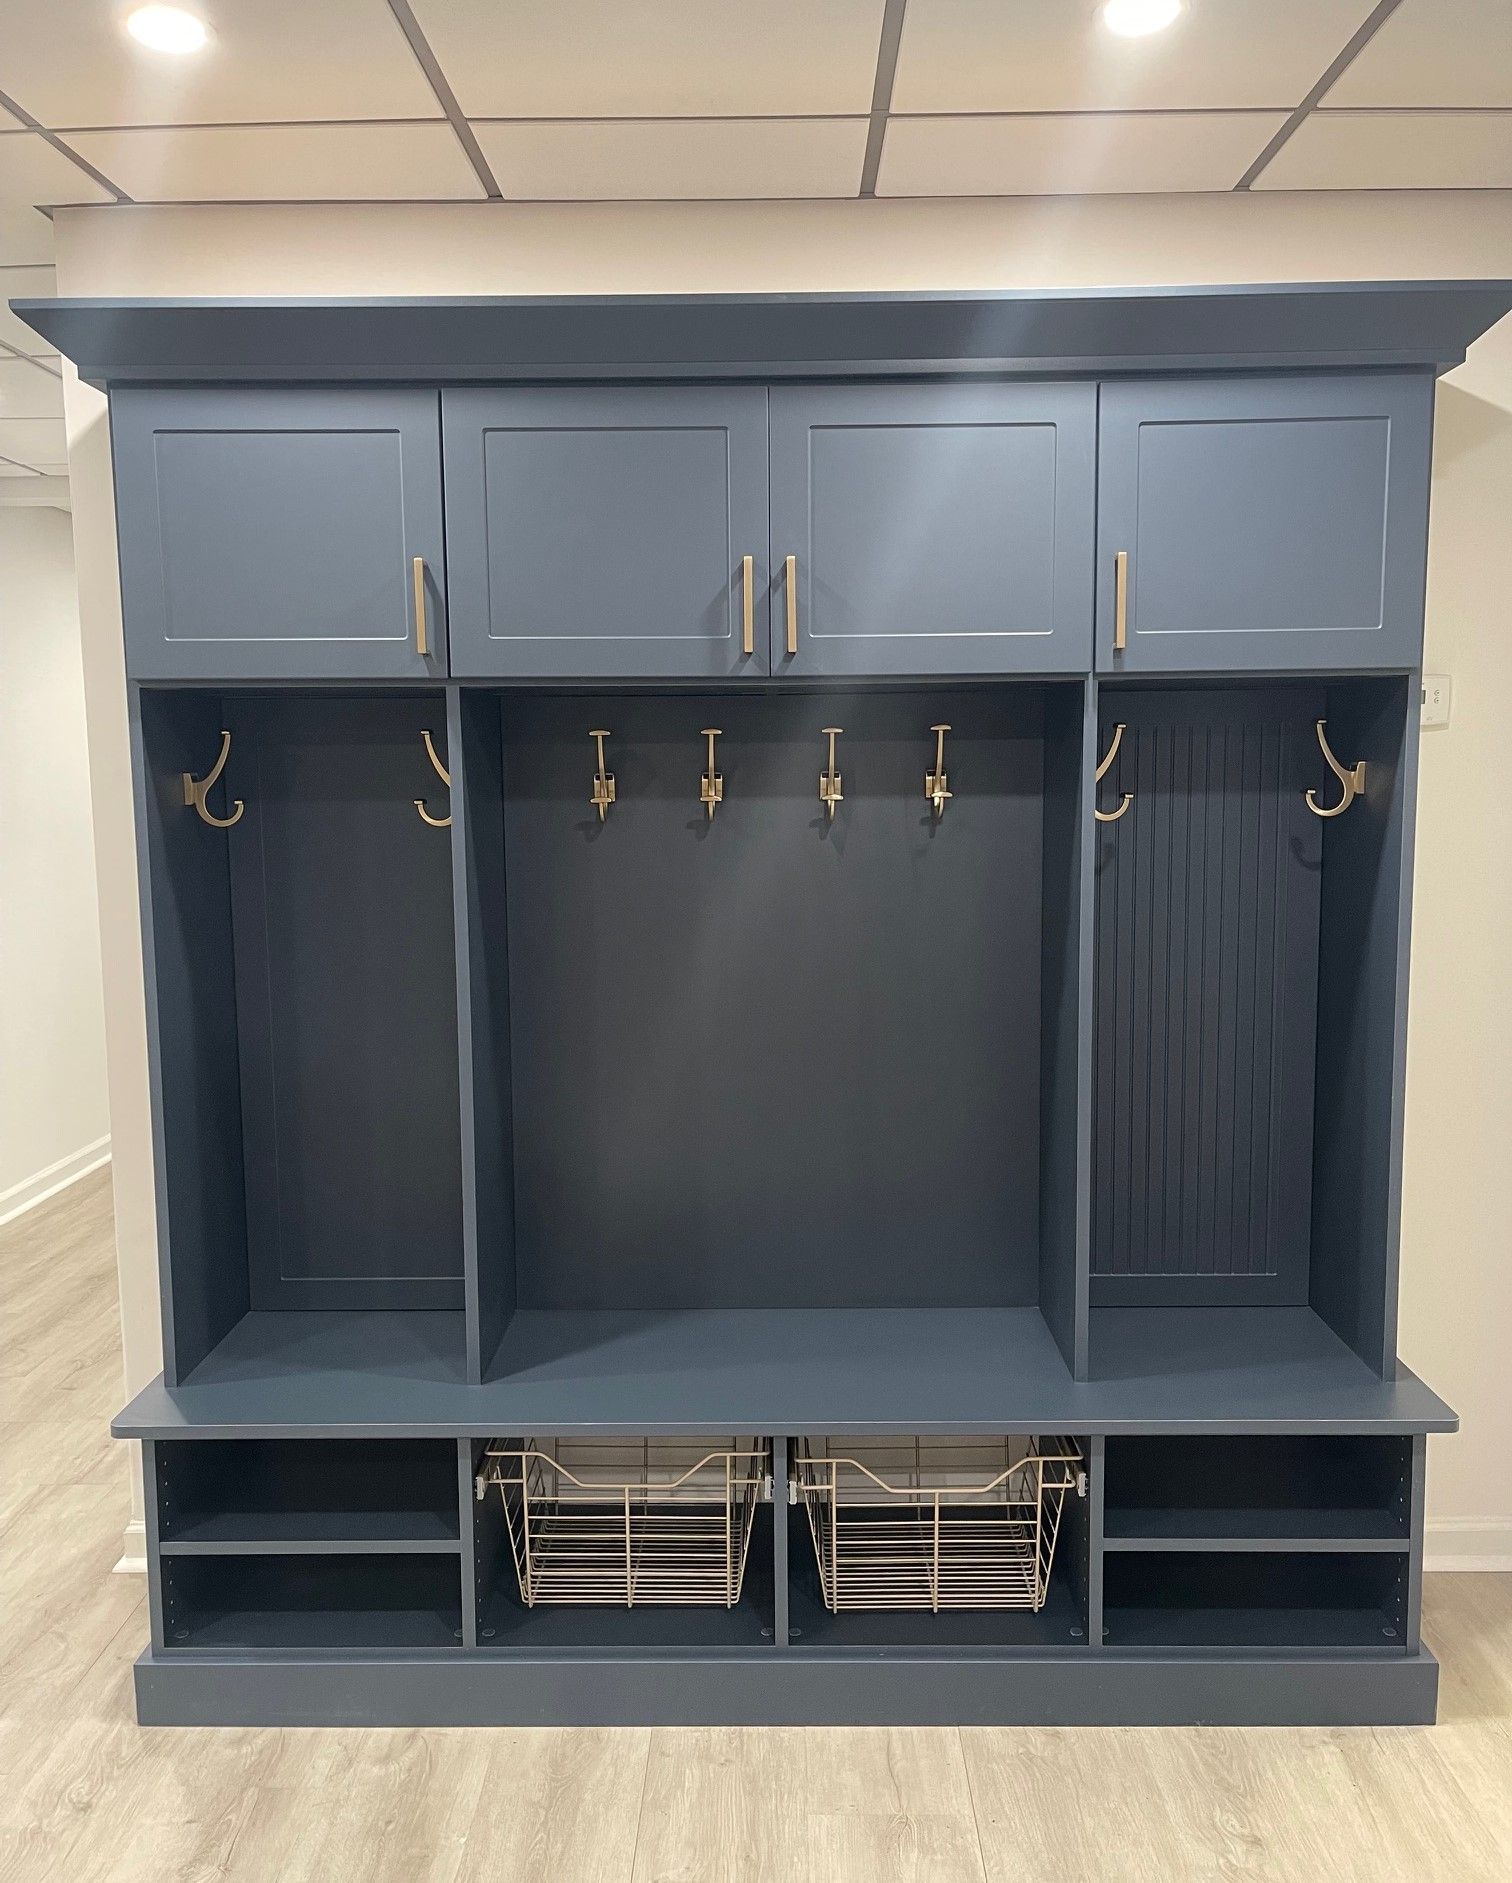 A large gray cabinet with hooks and shelves in a room.